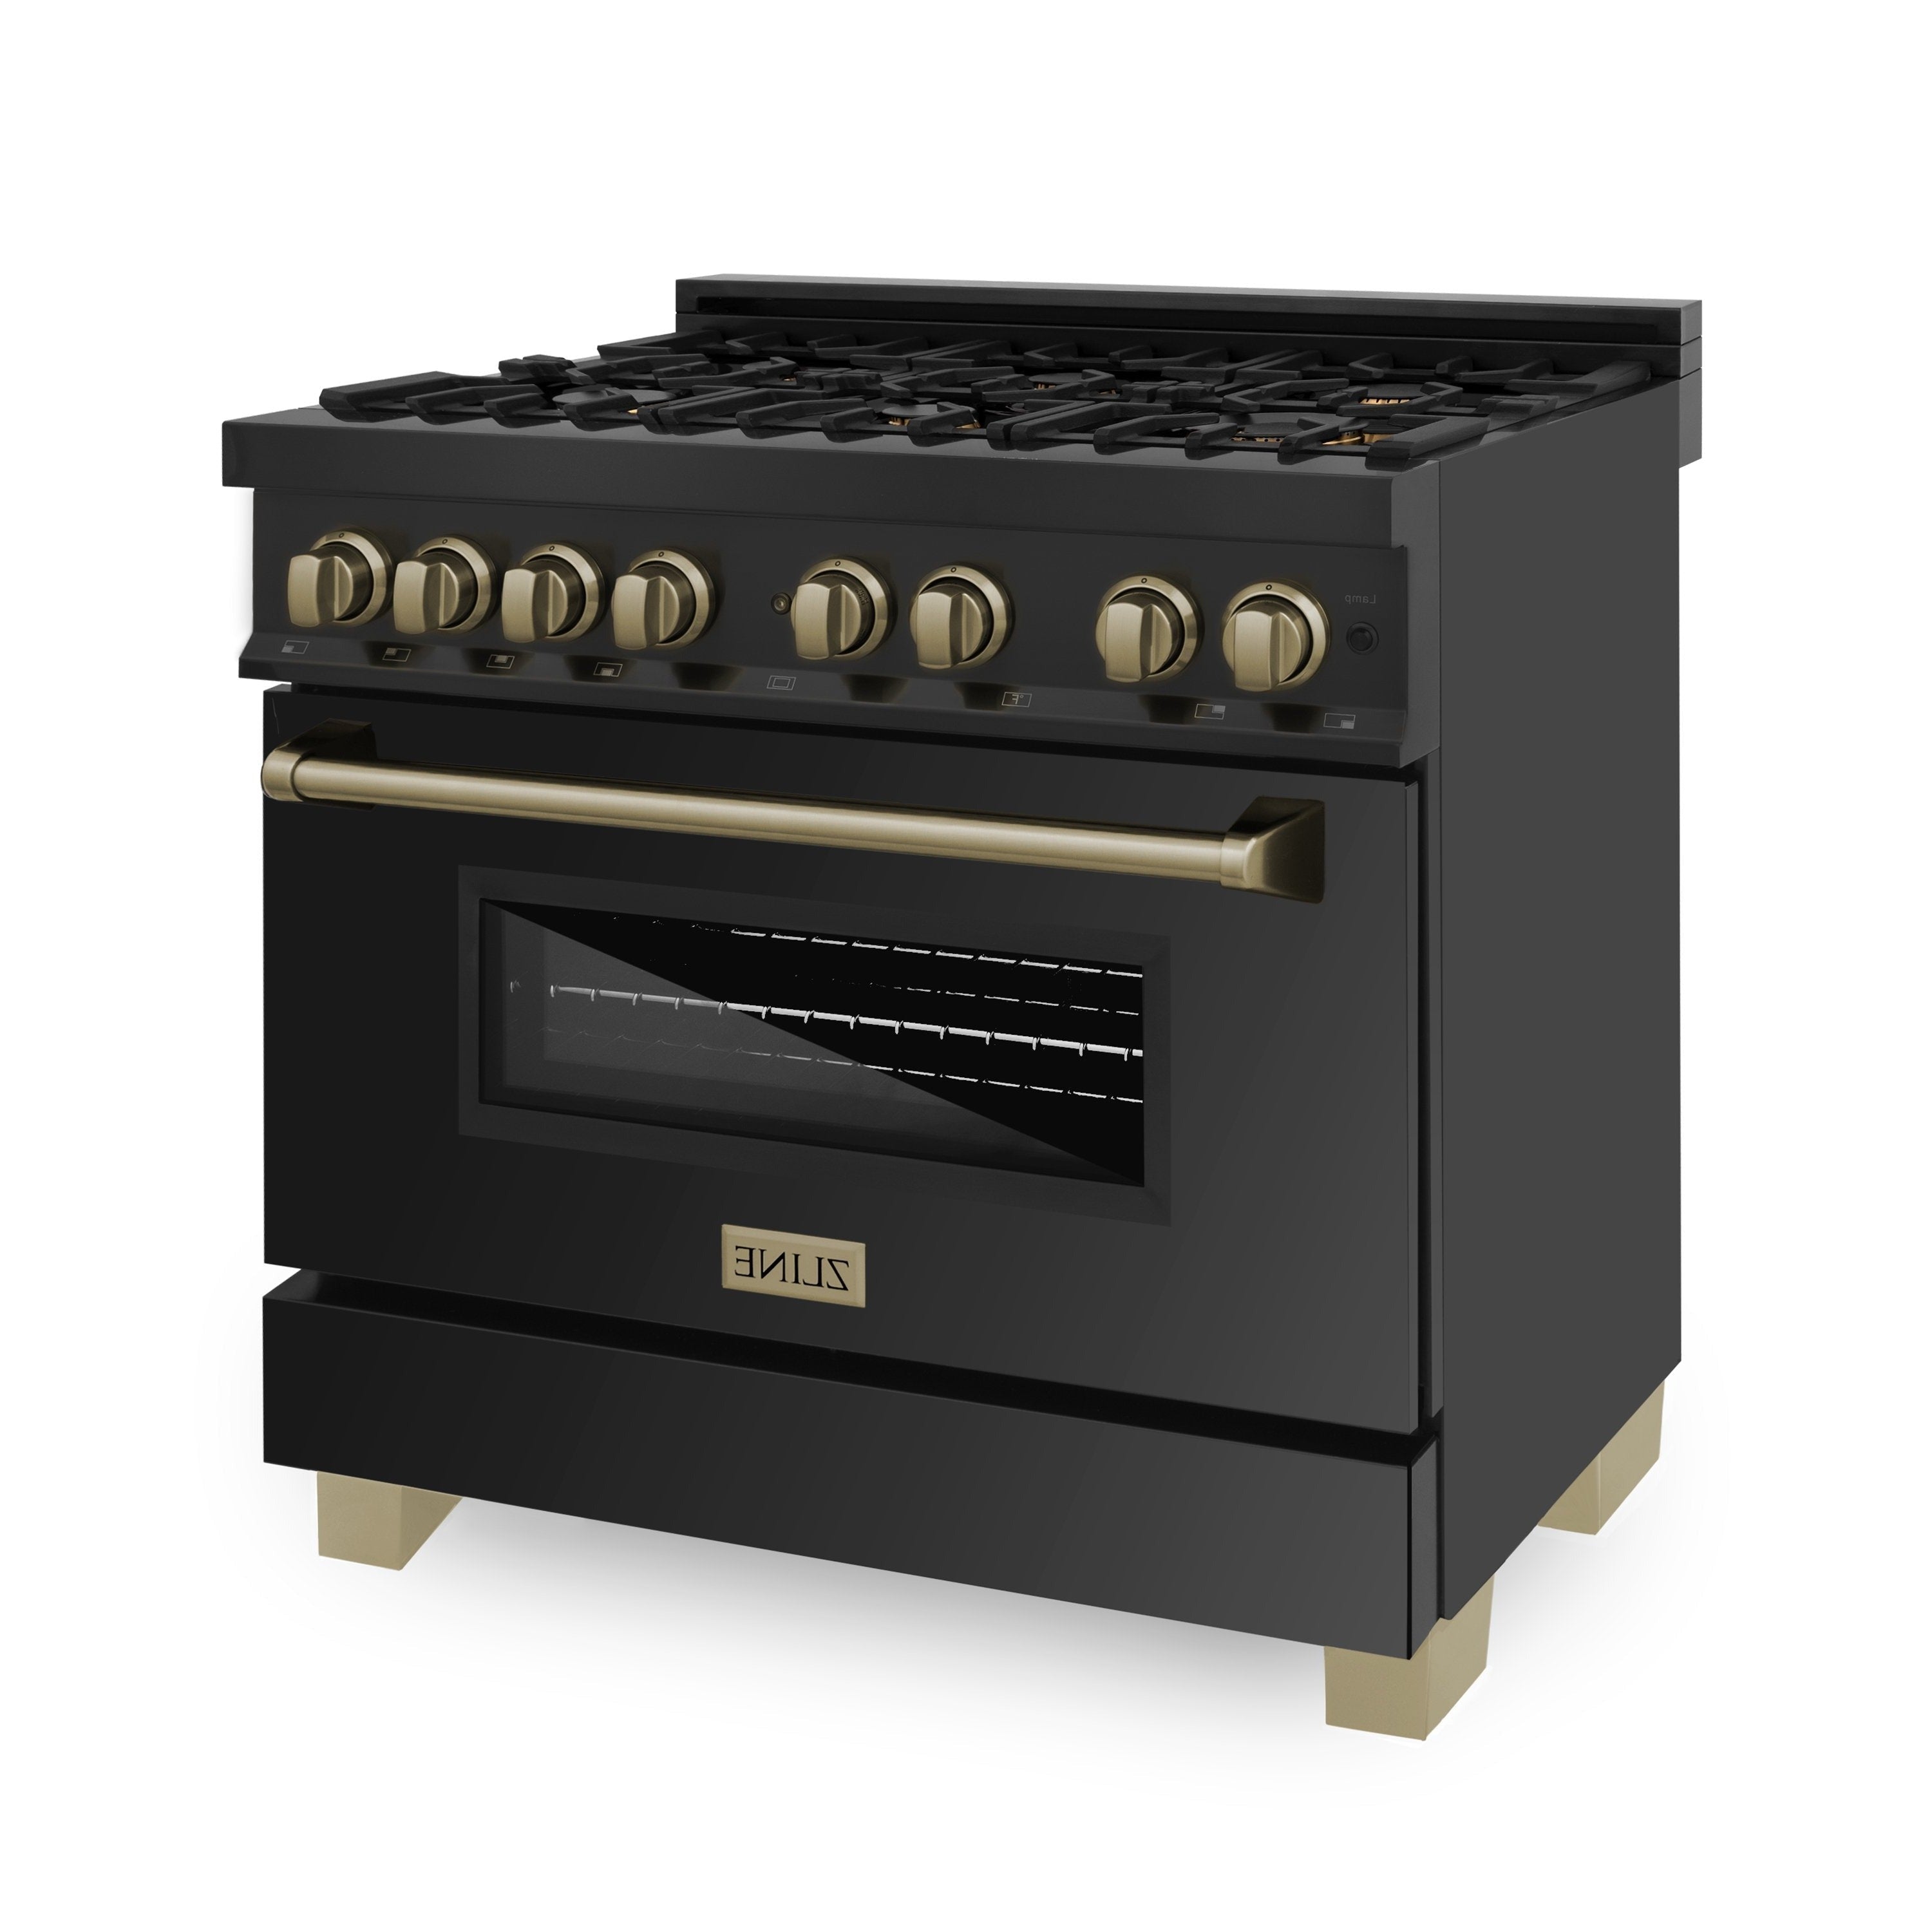 ZLINE Autograph Edition 60 7.4 Cu. ft. Dual Fuel Range with GAS Stove and Electric Oven in Stainless Steel with Accents (RAZ-60) Black Matte